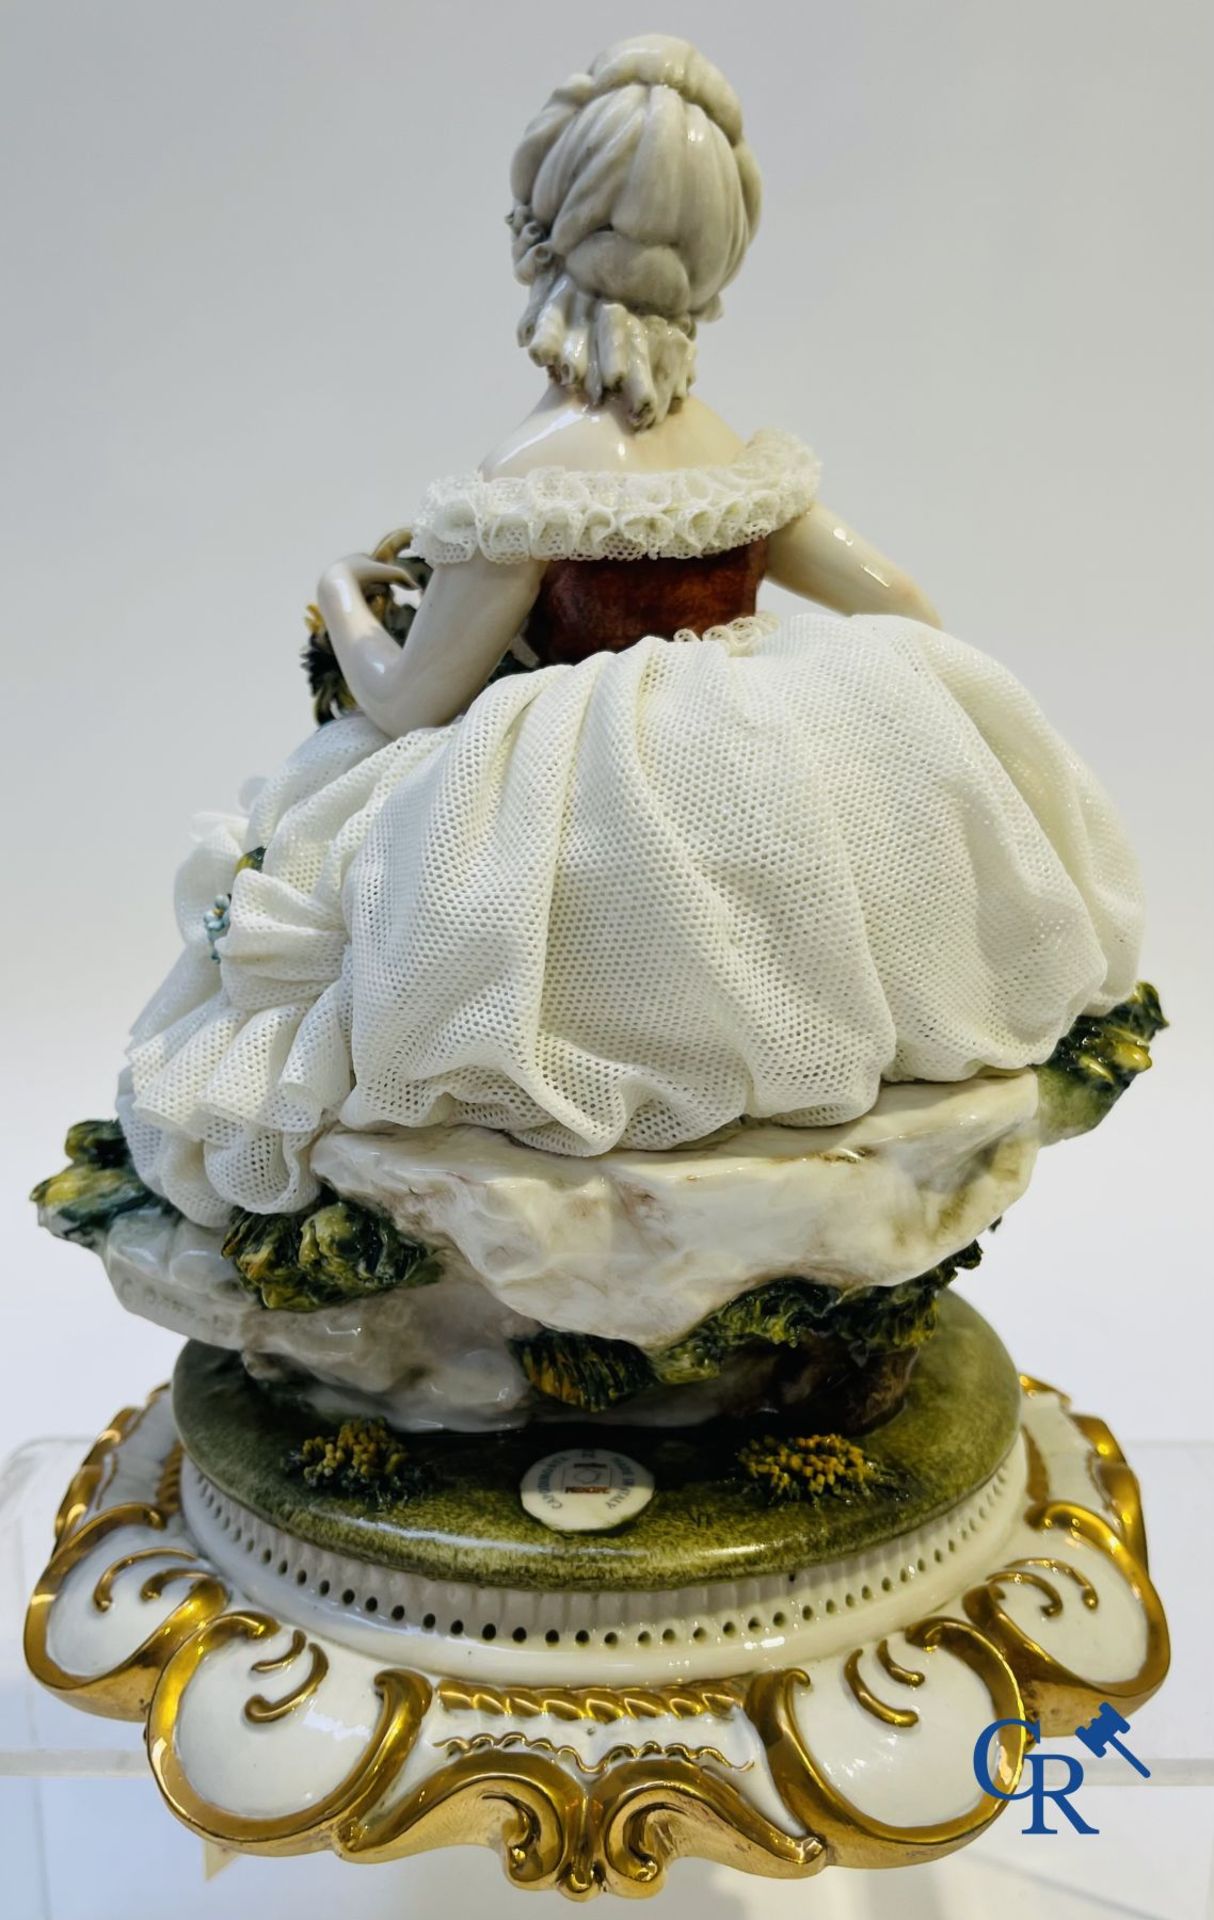 Porcelain: Capodimonte: 3 groups in Italian porcelain with lace. - Image 12 of 12